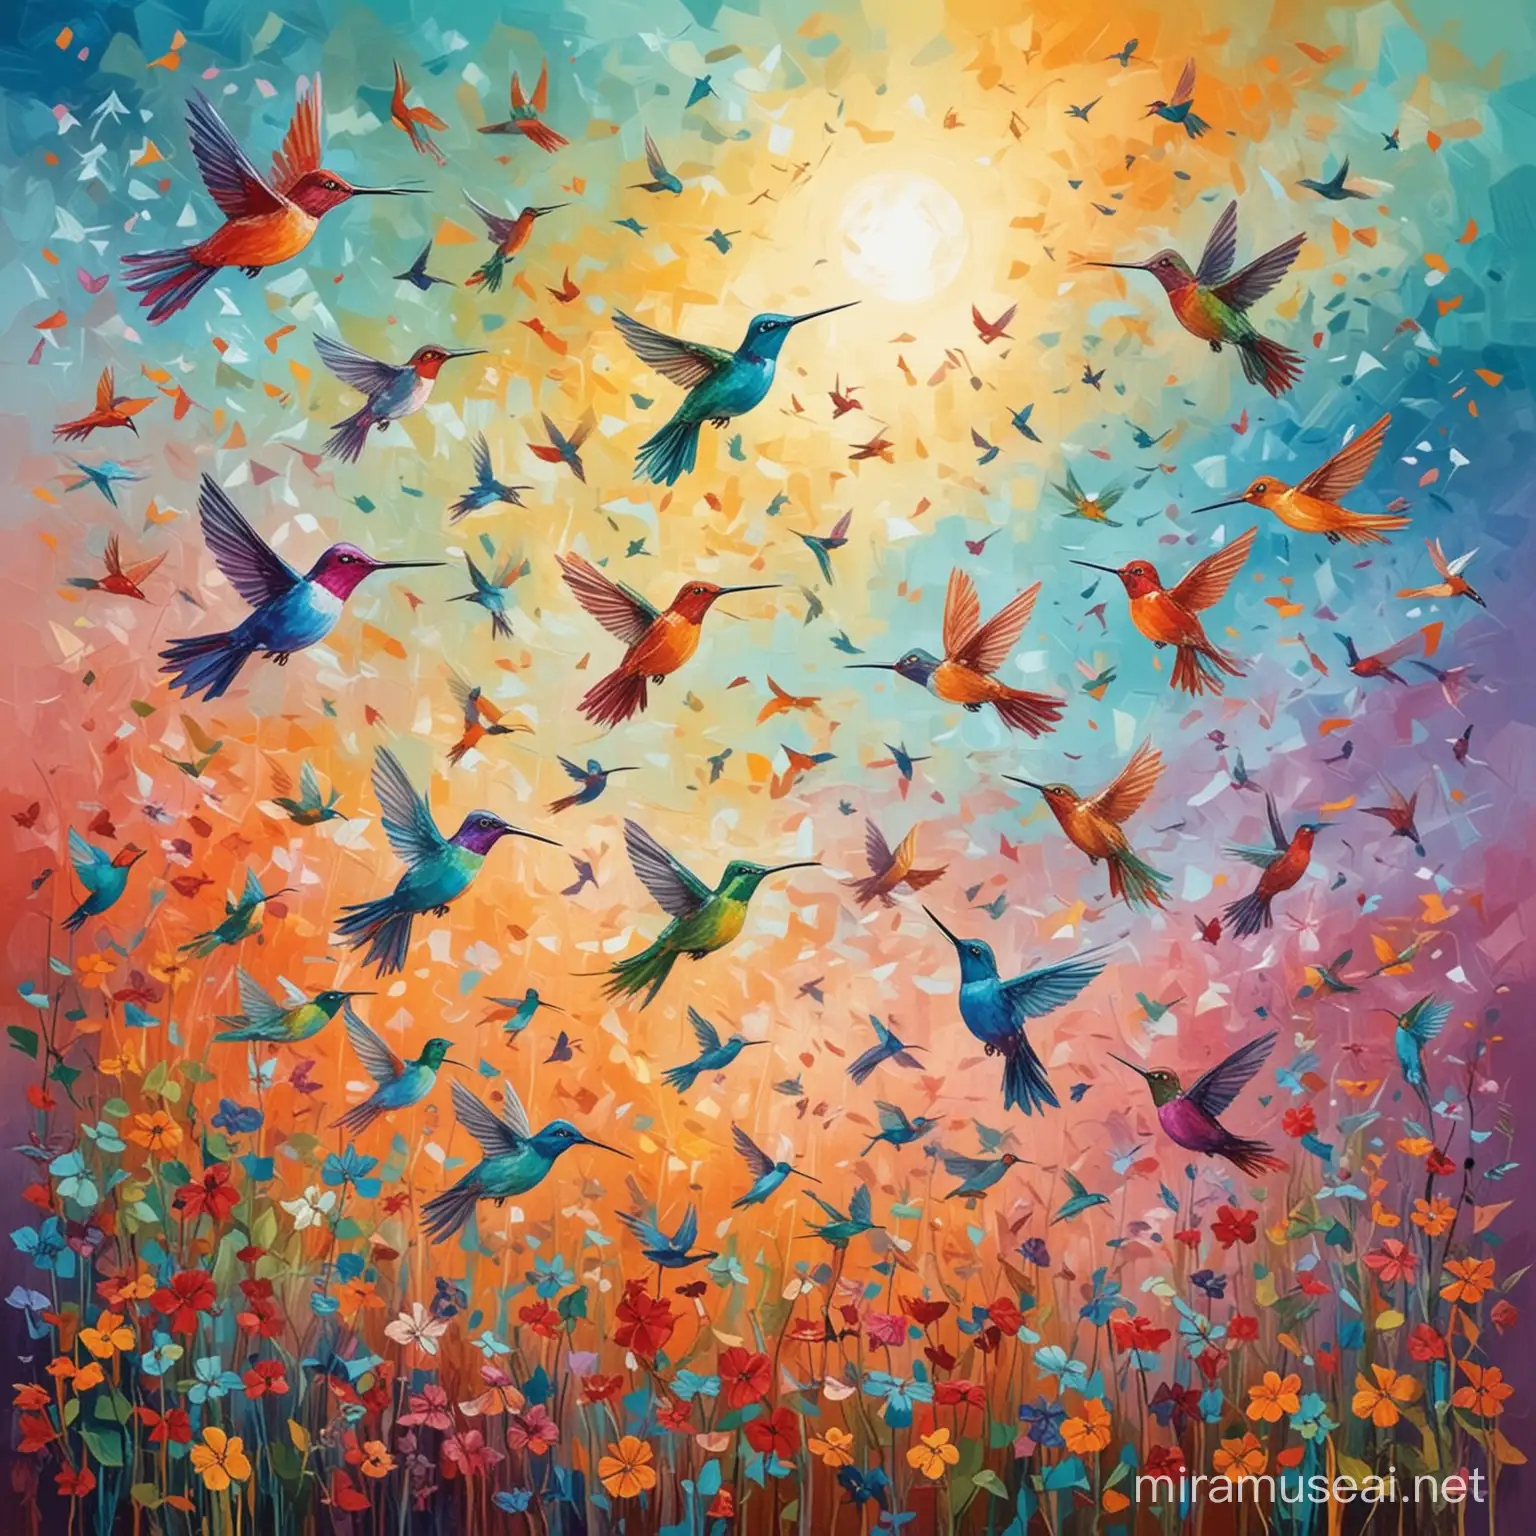 Abstract Folk Art many hummingbirds flying in the sky with colorful background